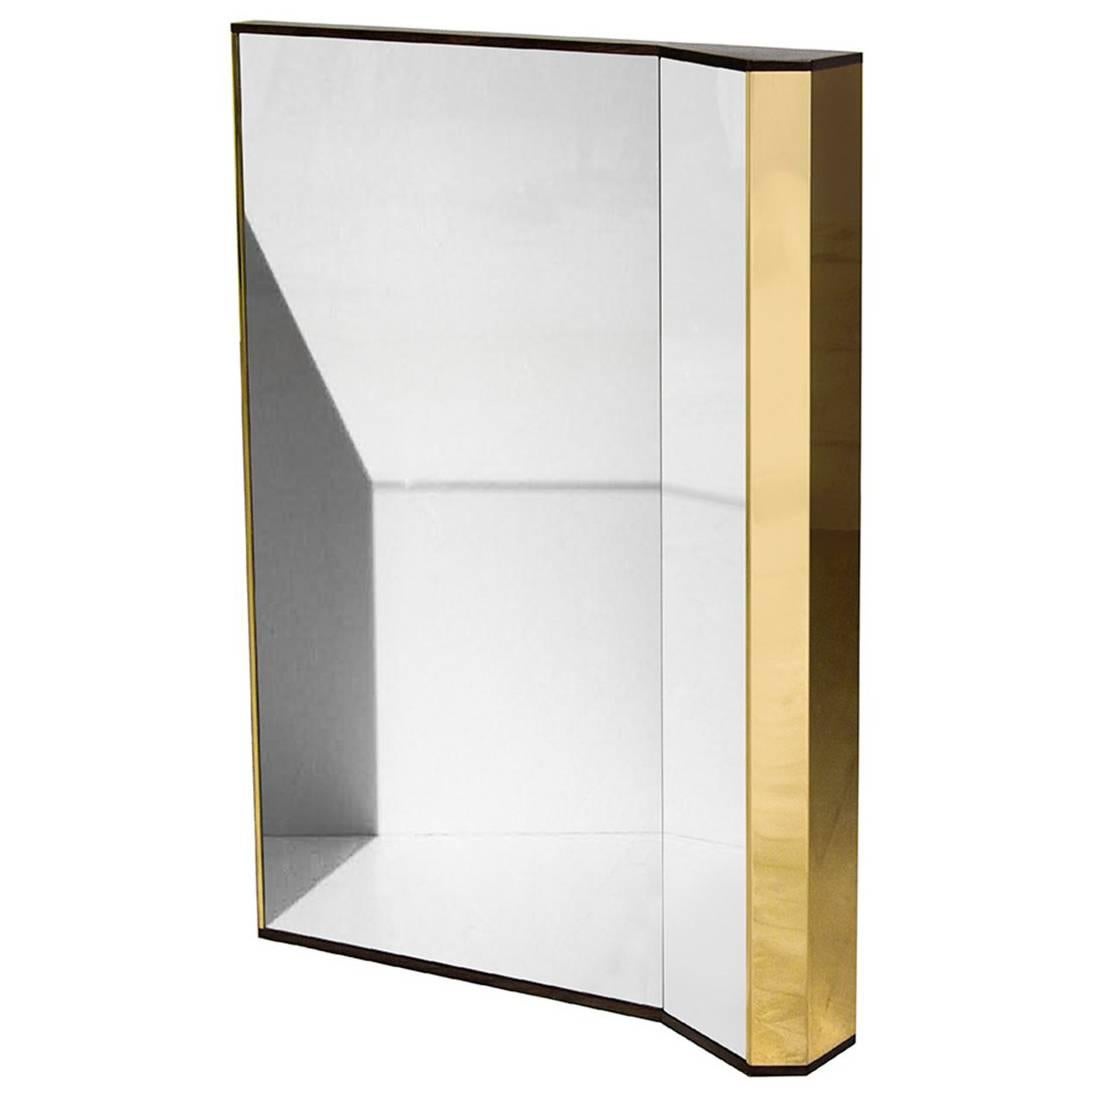 Freestanding Wood Board Framed Mirror K1 with Polished Brass Elements